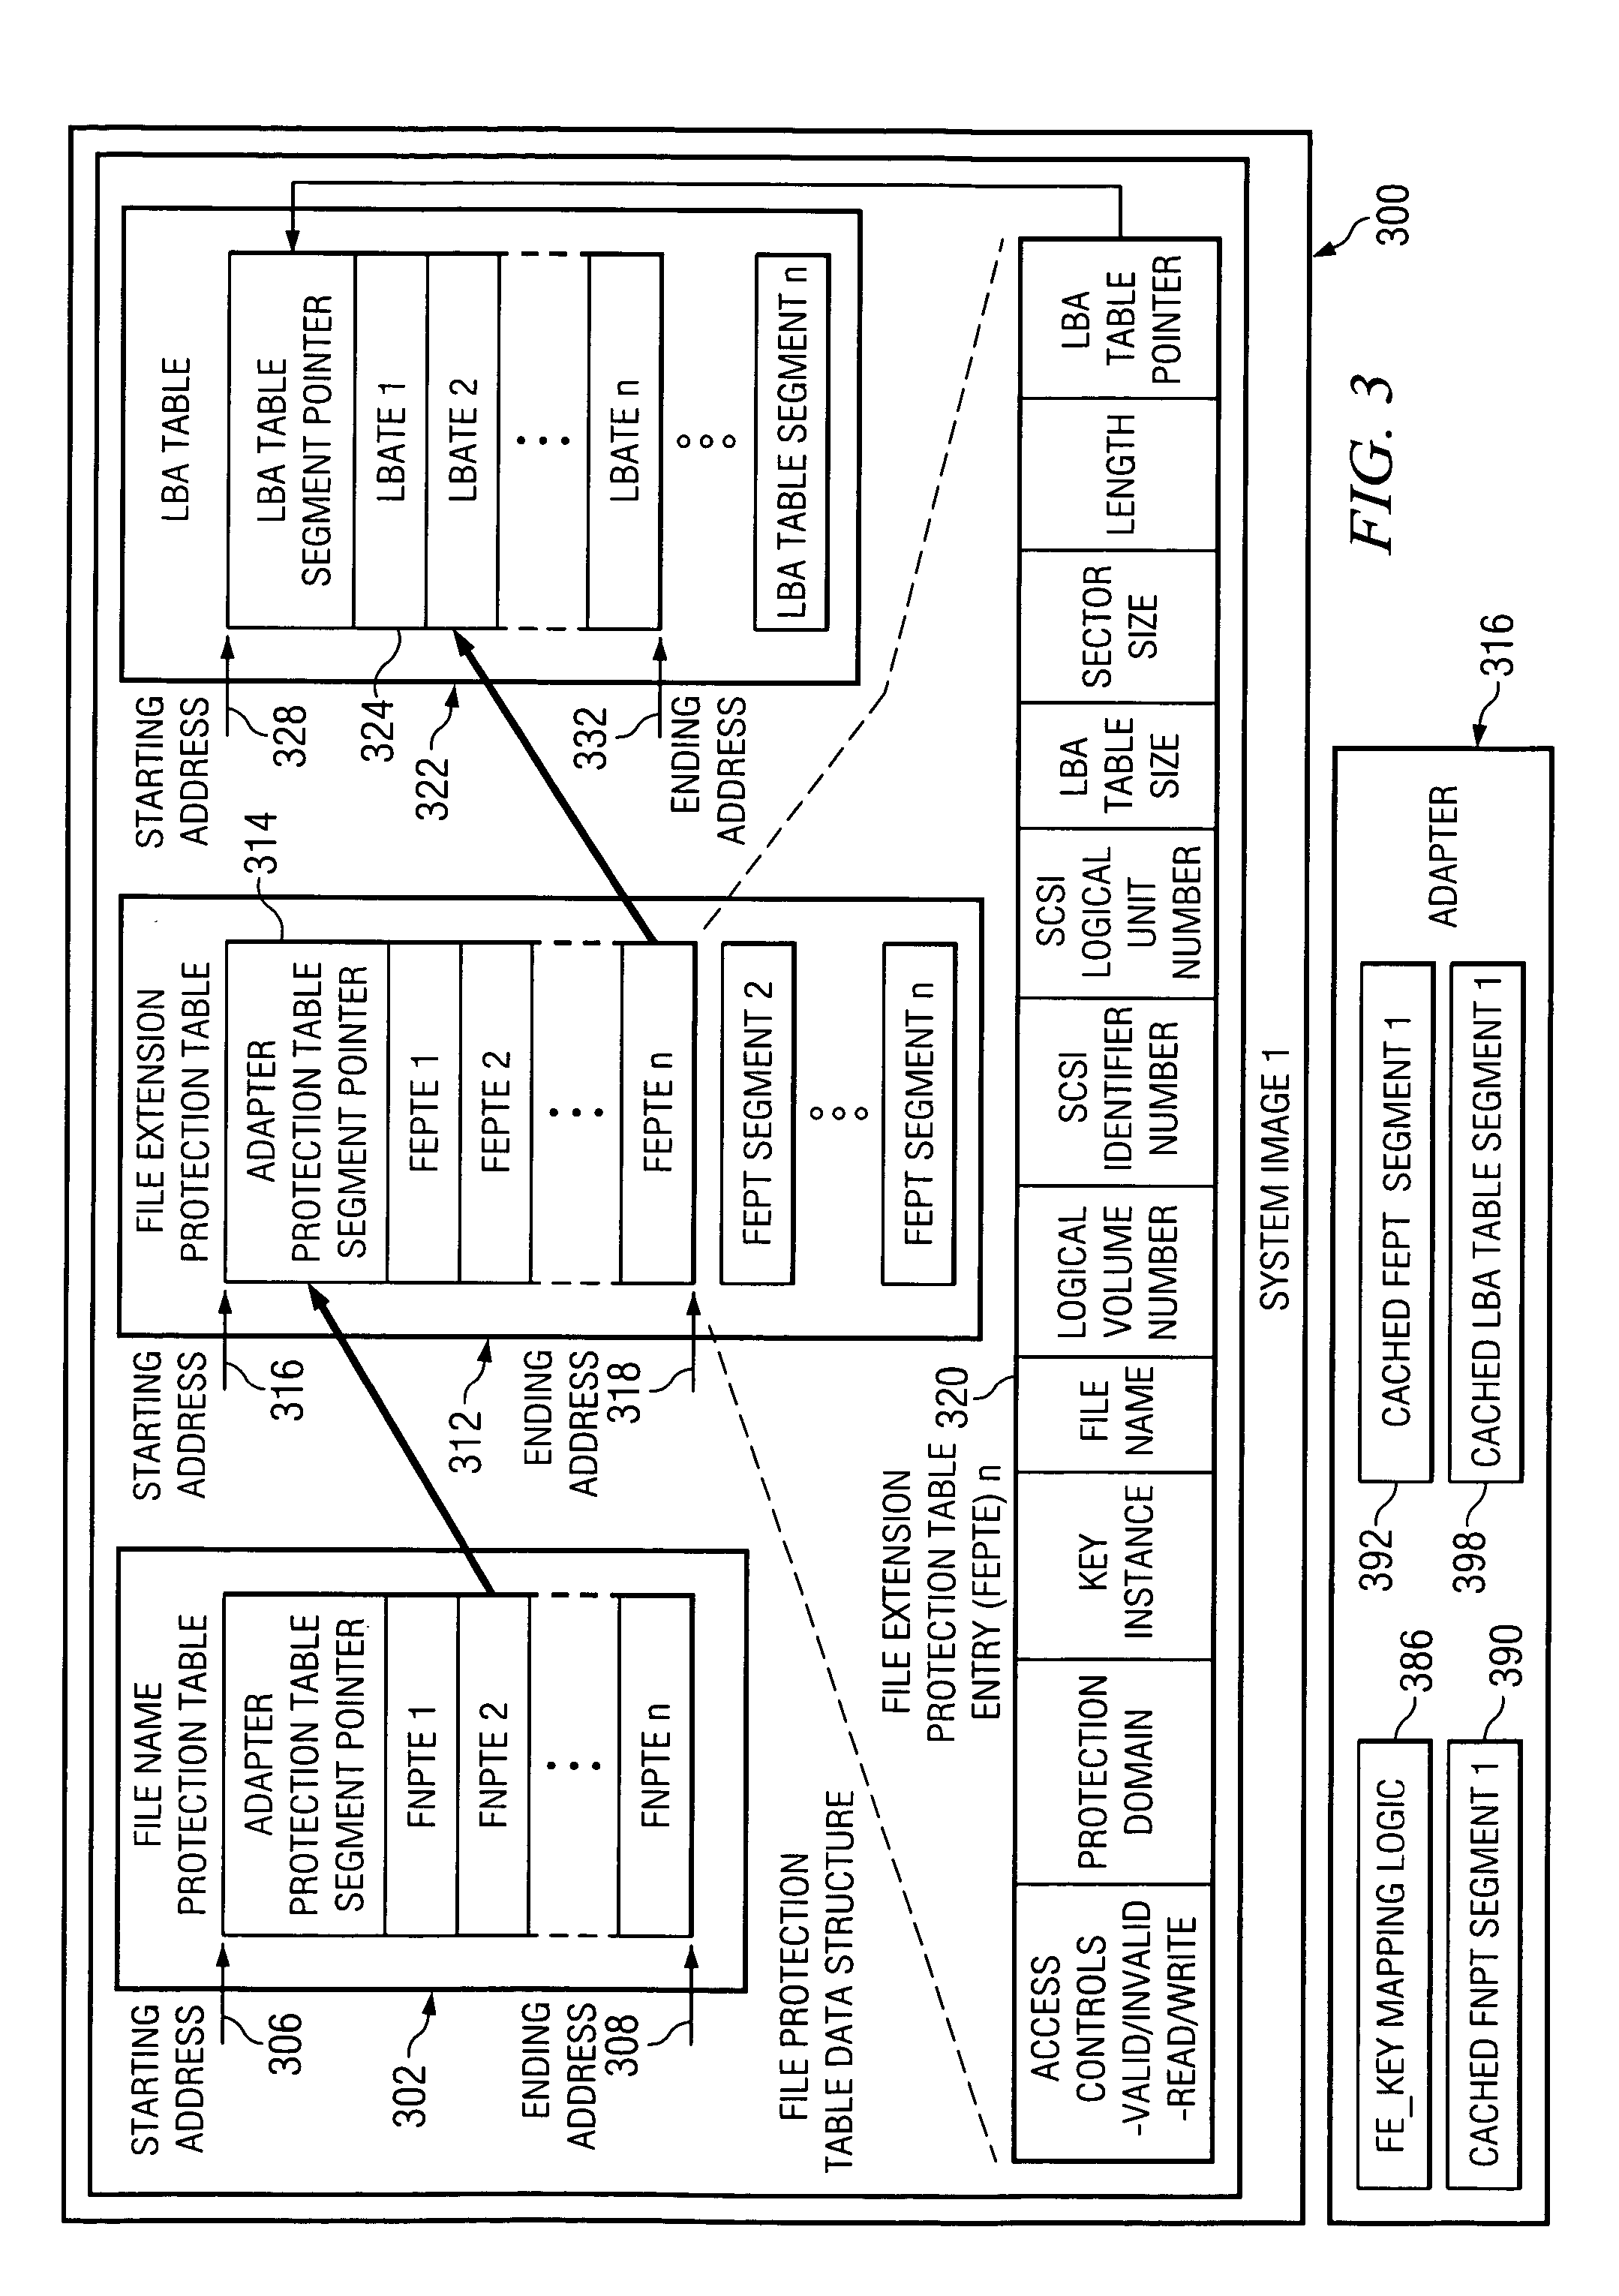 System and method for file based I/O directly between an application instance and an I/O adapter